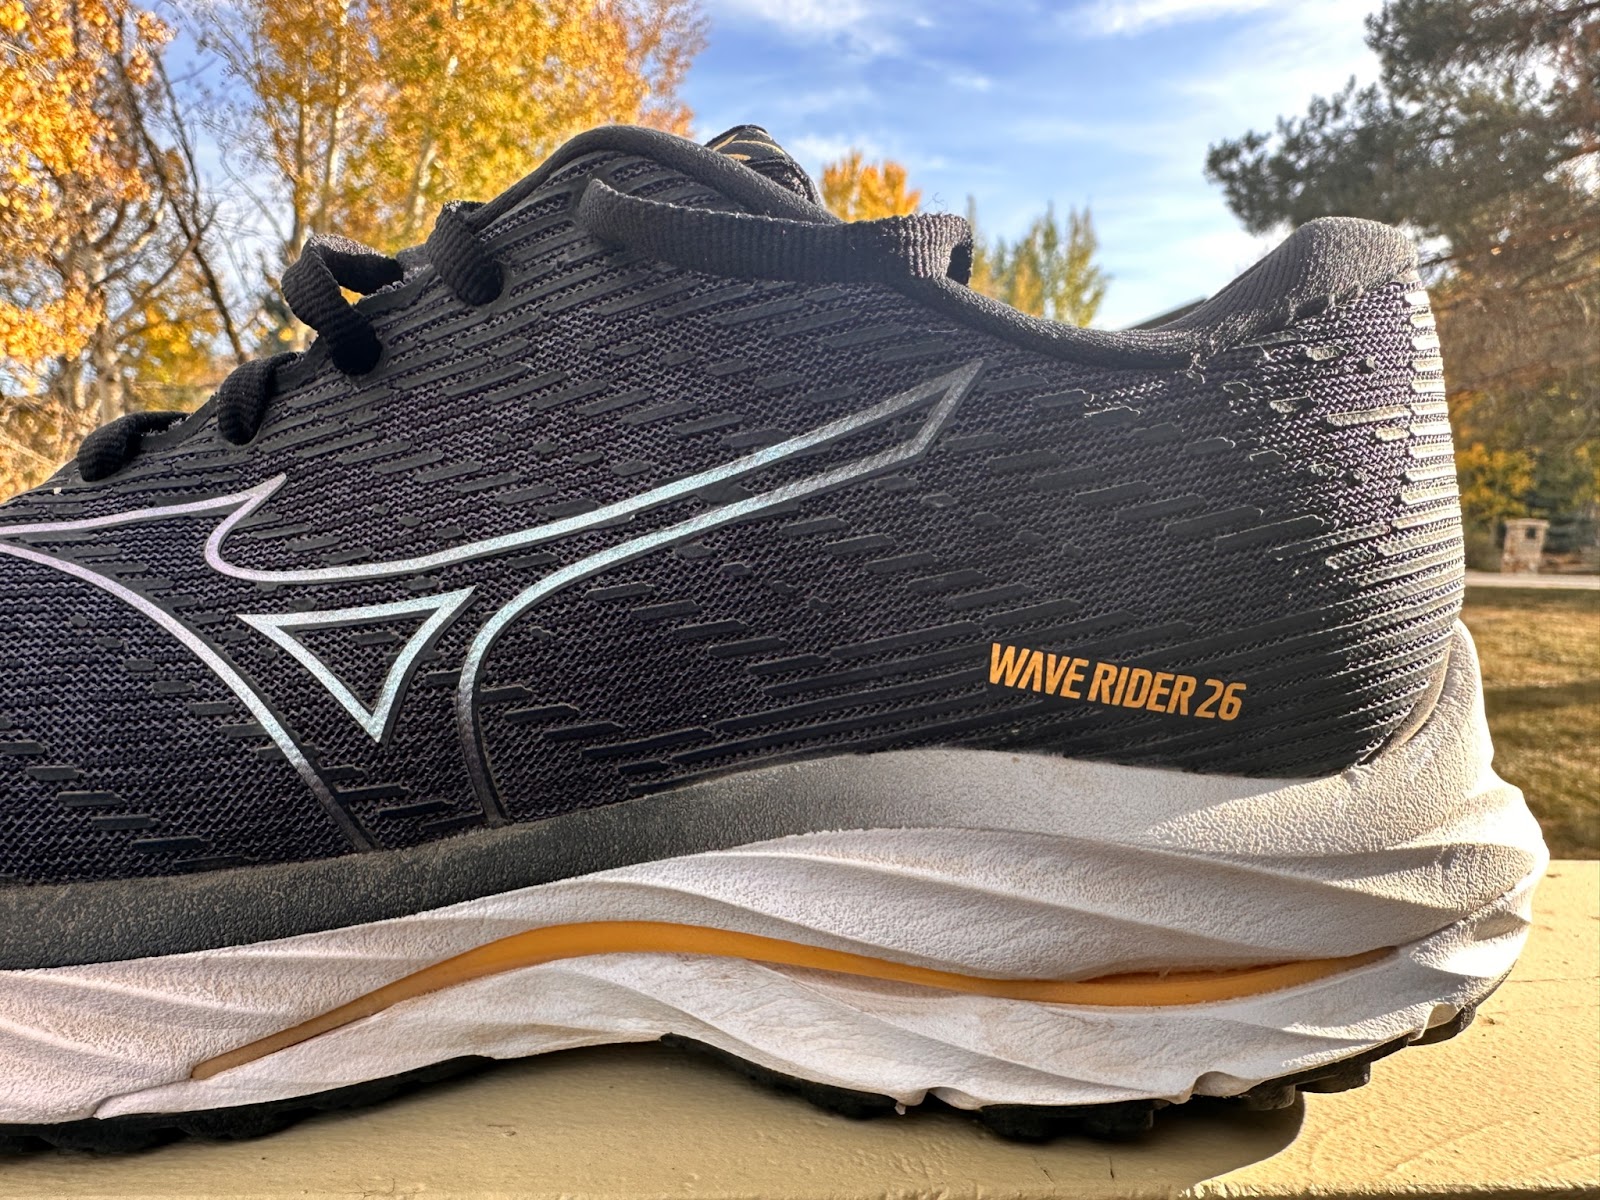 Mizuno Wave Rider 26 Review: Don't Know 'Bout You, But We're